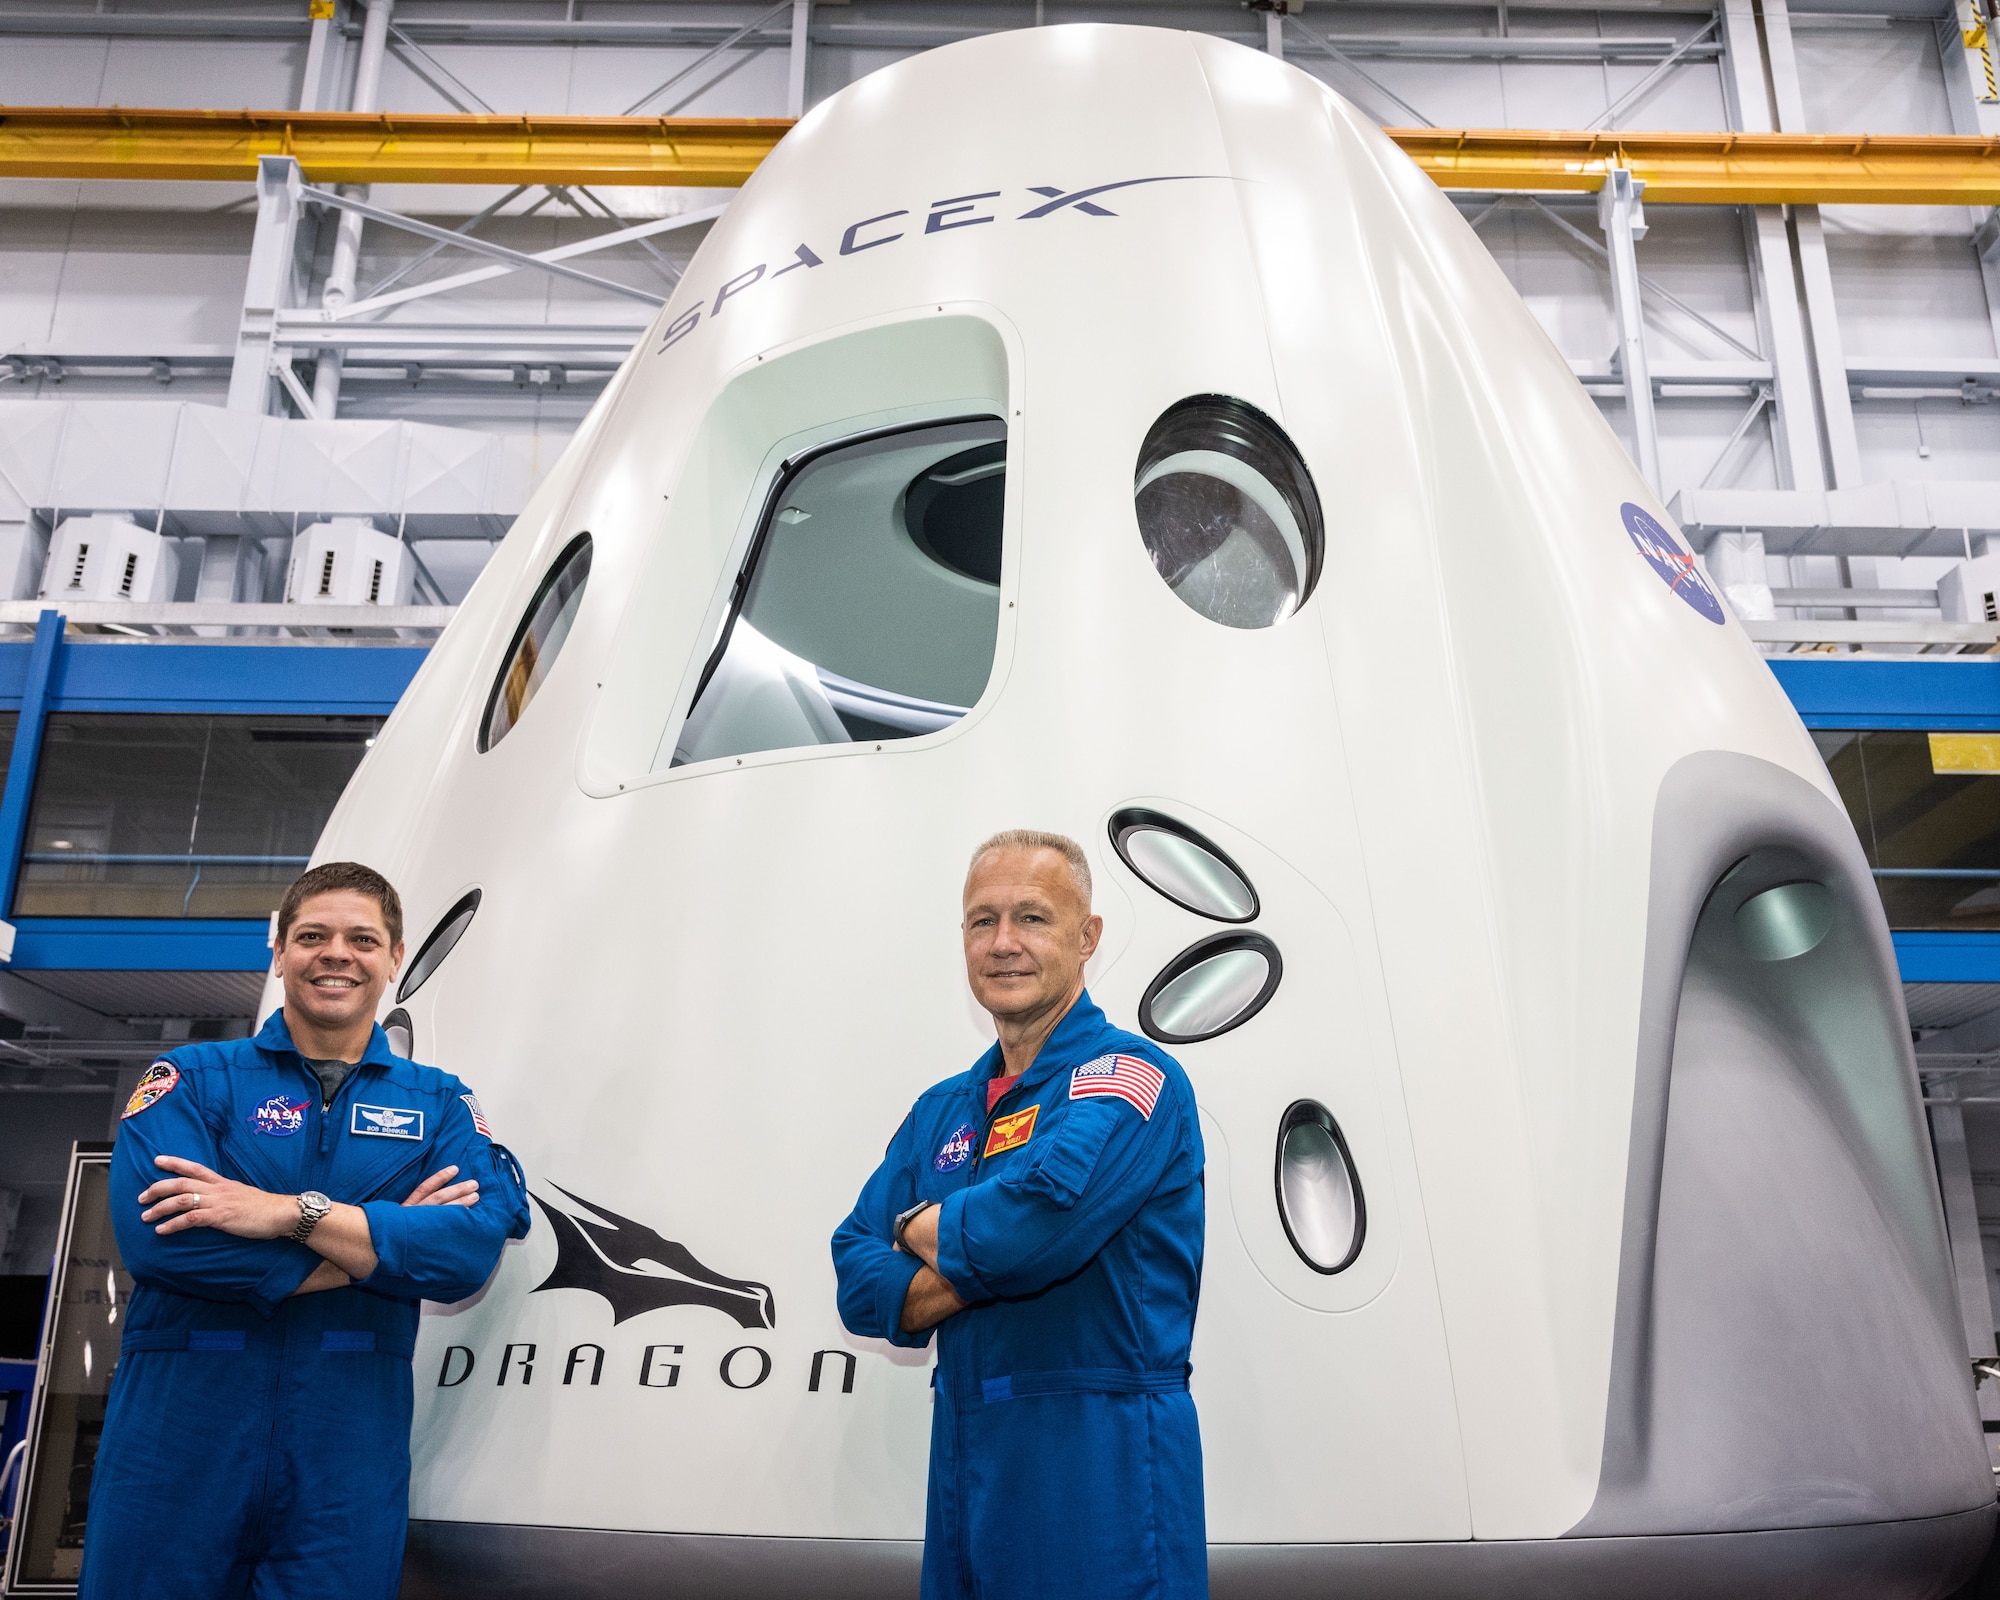 NASA astronauts Bob Behnken and Doug Hurley, assigned to fly on the first test flight of SpaceX’s Crew Dragon, pose in front of a mockup of the spacecraft at NASA’s Johnson Space Center in Houston, Texas on Aug. 2, 2018 ahead of the agency’s announcement of their commercial crew assignment Aug. 3.  Nine U.S. astronauts were selected for commercial crew flight assignments on the first test flights and operational missions for Boeing’s CST-100 Starliner and SpaceX’s Crew Dragon. Photo Credit: (NASA/Robert Markowitz)